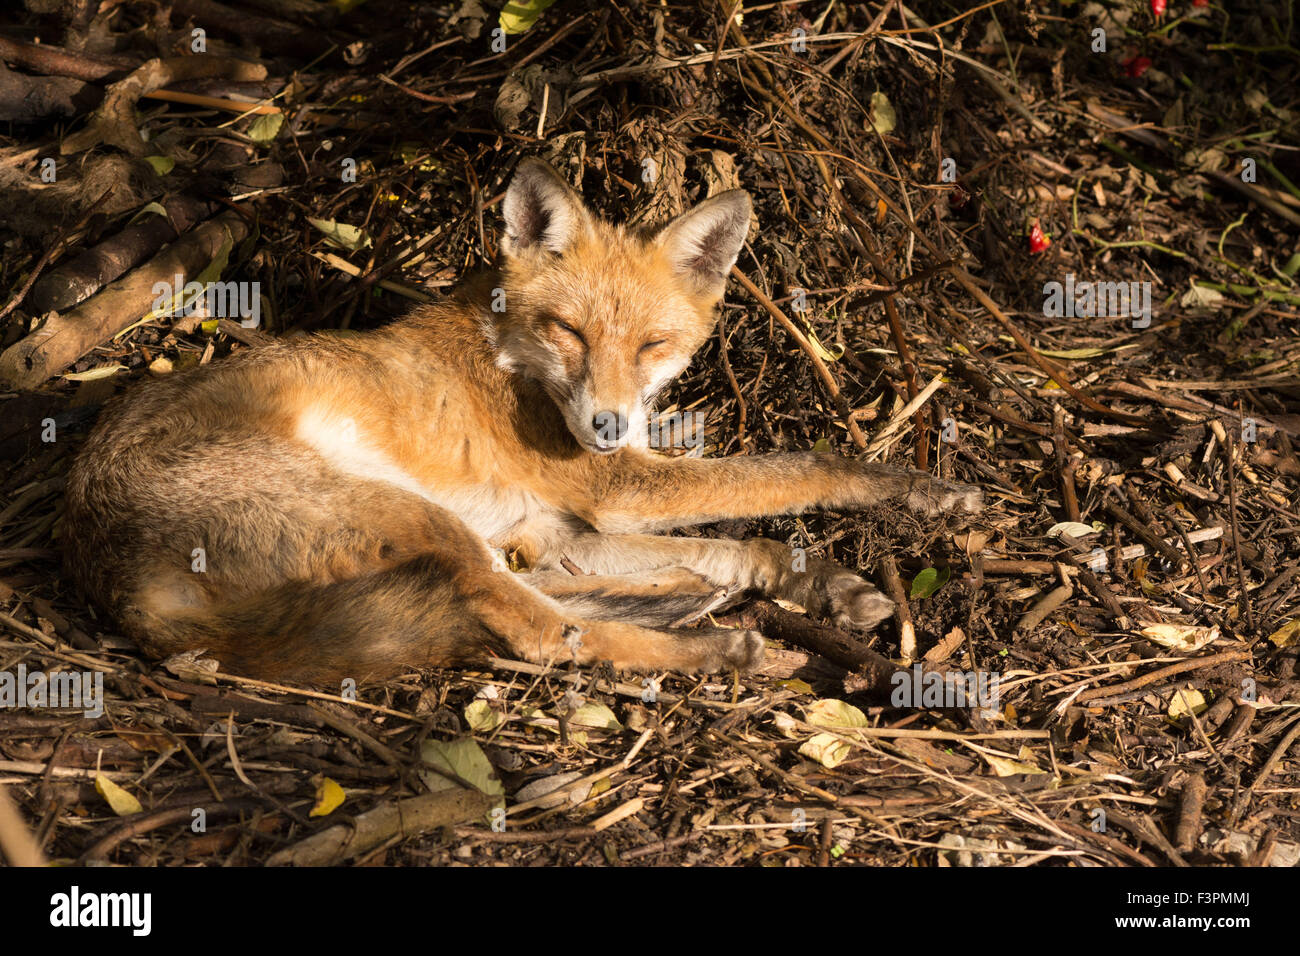 London, UK, 11th October 2015. A fox is seen lazing on a sunny afternoon at the bottom of a back garden in Tottenham, London. The relaxed canine was enjoying the pleasant weather which is forecast to continue bright and sunny in the south east of England but colder over the next few days. Credit:  Patricia Phillips/Alamy Live News Stock Photo